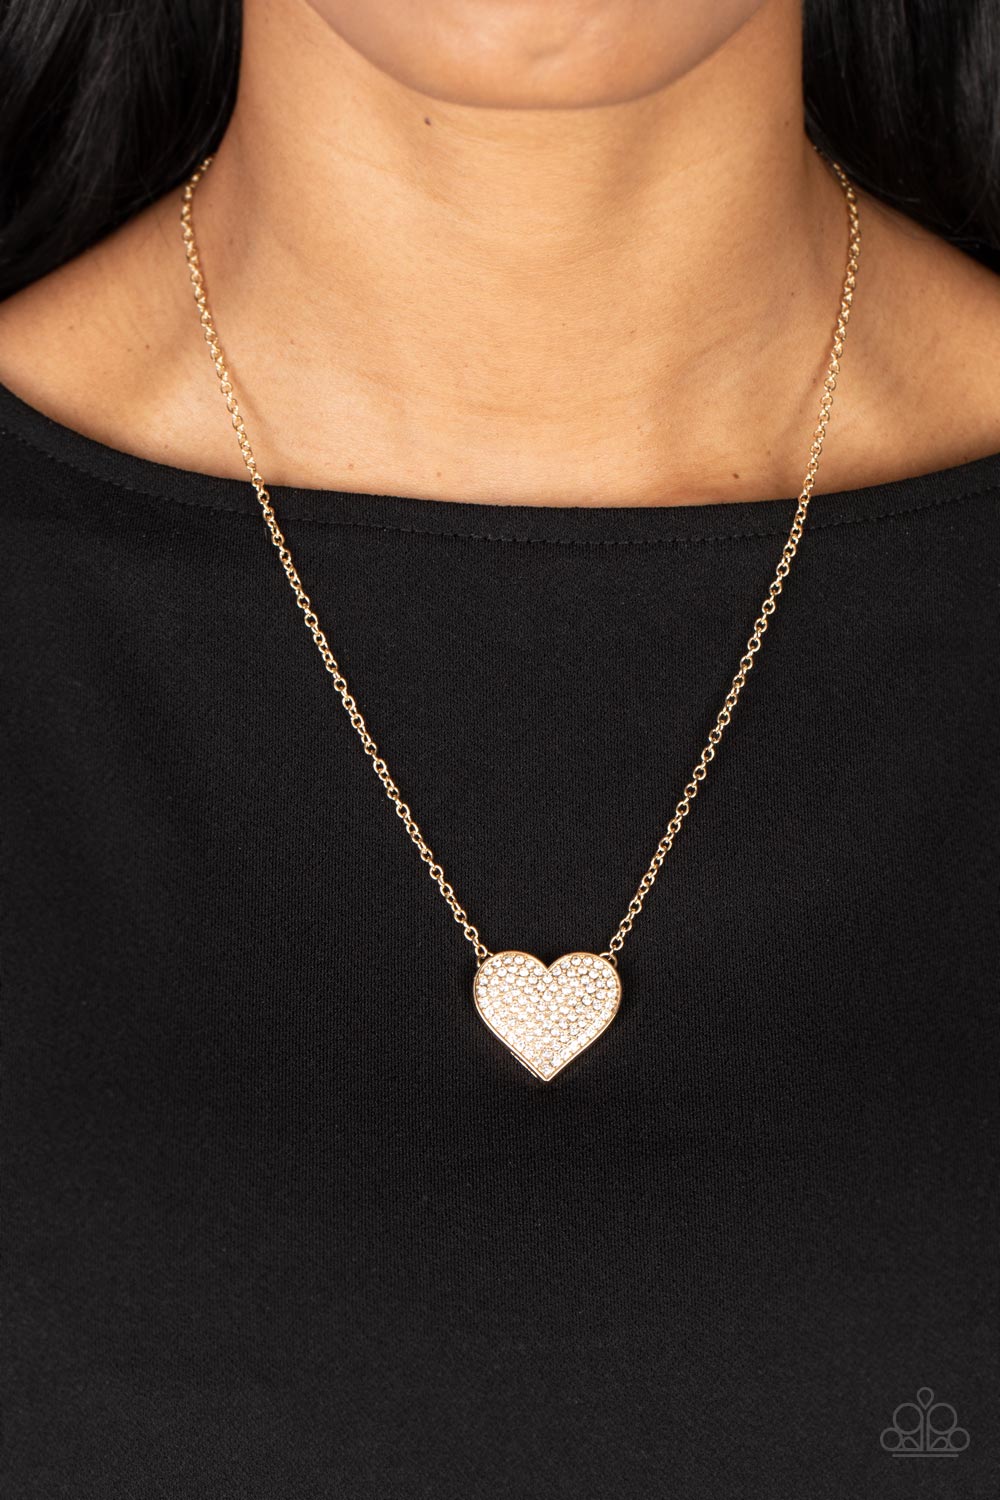 Paparazzi Accessories - Spellbinding Sweetheart #N56 Box 1 - Gold Necklace